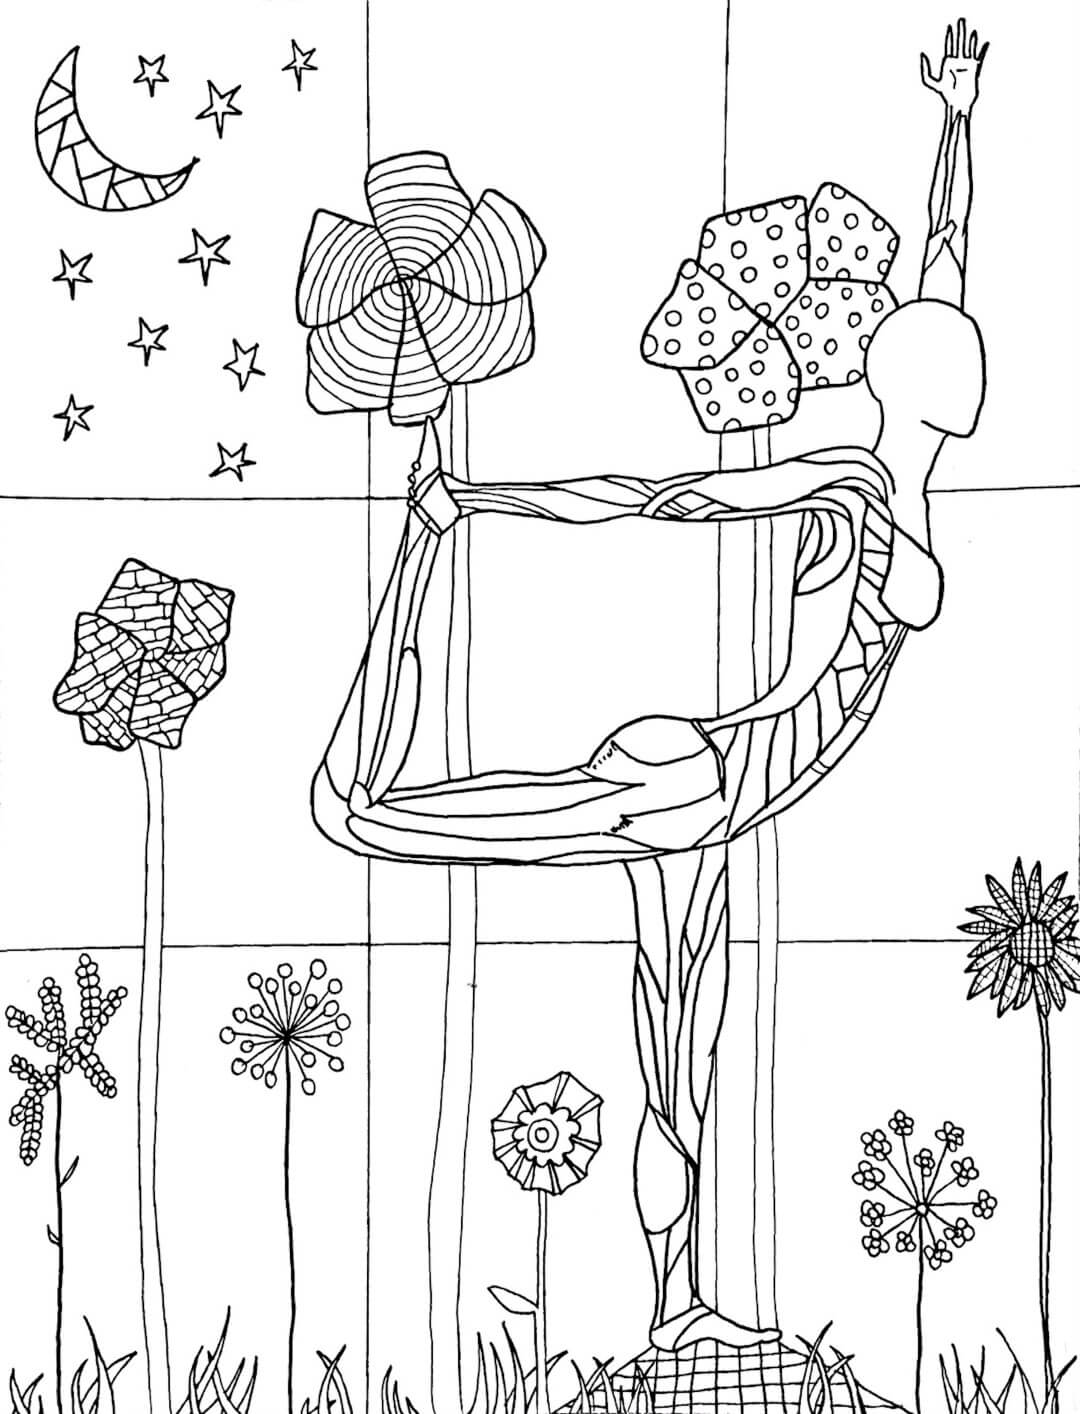 Dance Pose Yoga Coloring Page